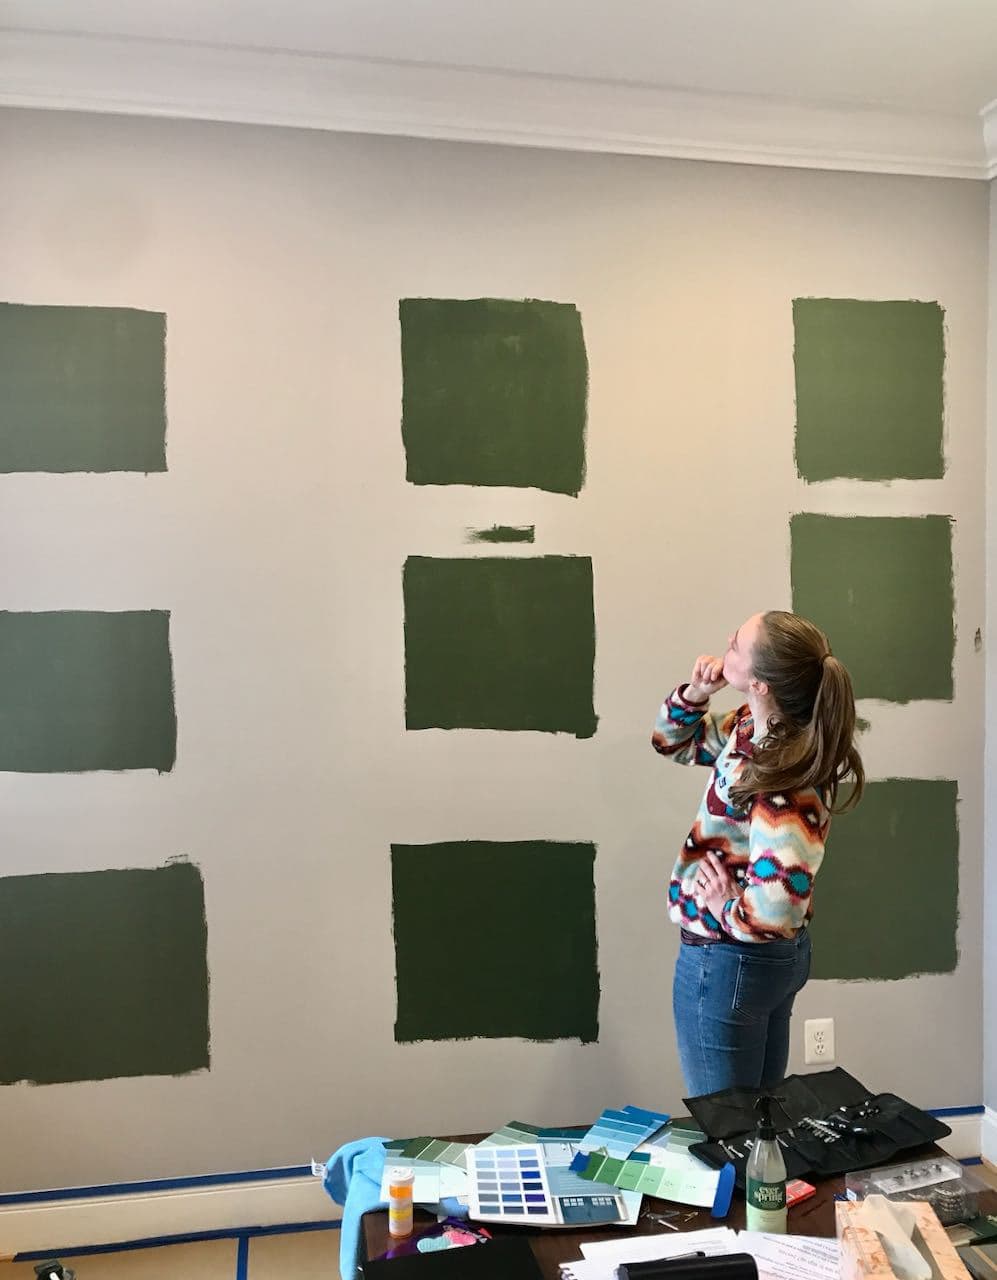 Yound adult woman with a long blonde ponytail is standing in front of a large wall that has squares of three different shades of green paint trying to decide which color she likes best